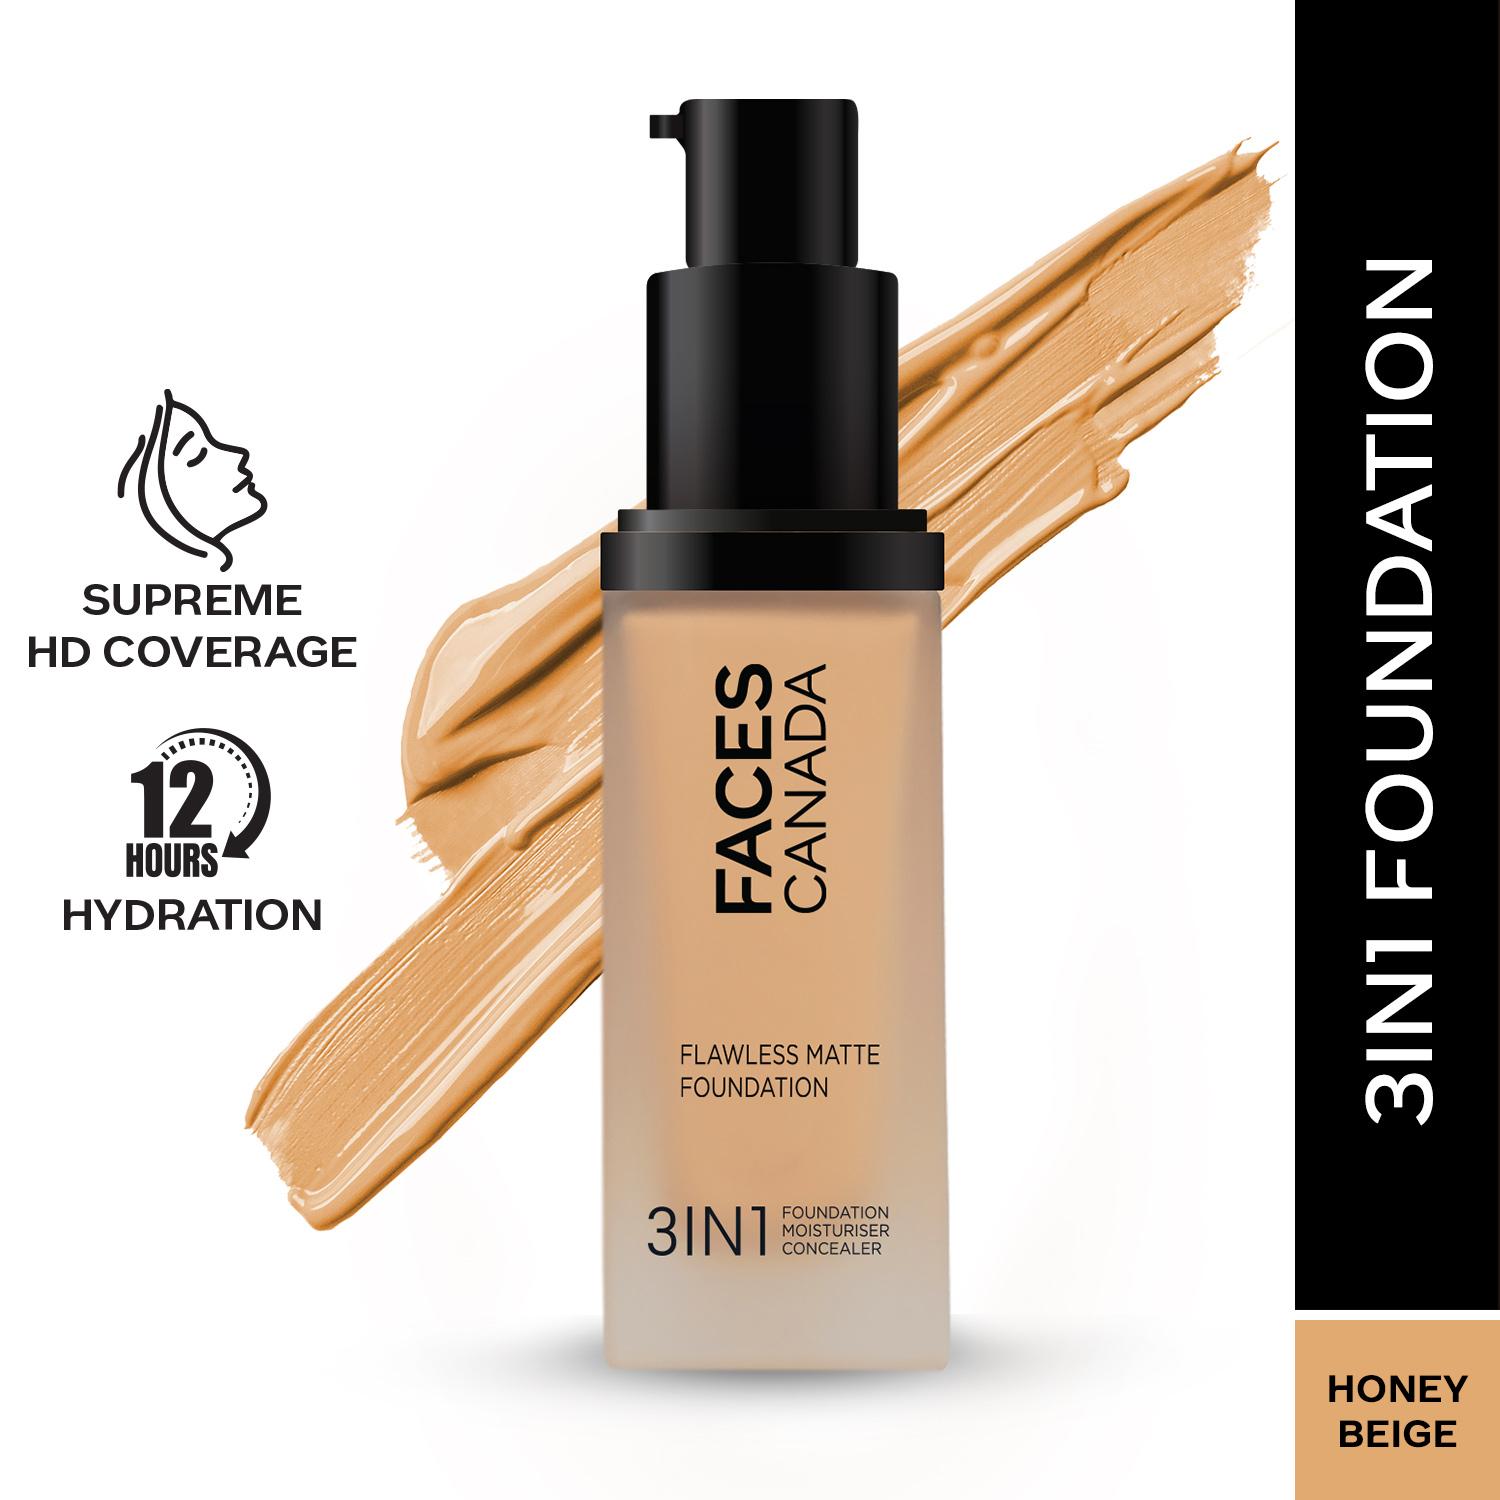 Faces Canada | Faces Canada Flawless Matte Foundation - Honey Beige 031, 12 HR Hydration + SPF 18 (30 ml)